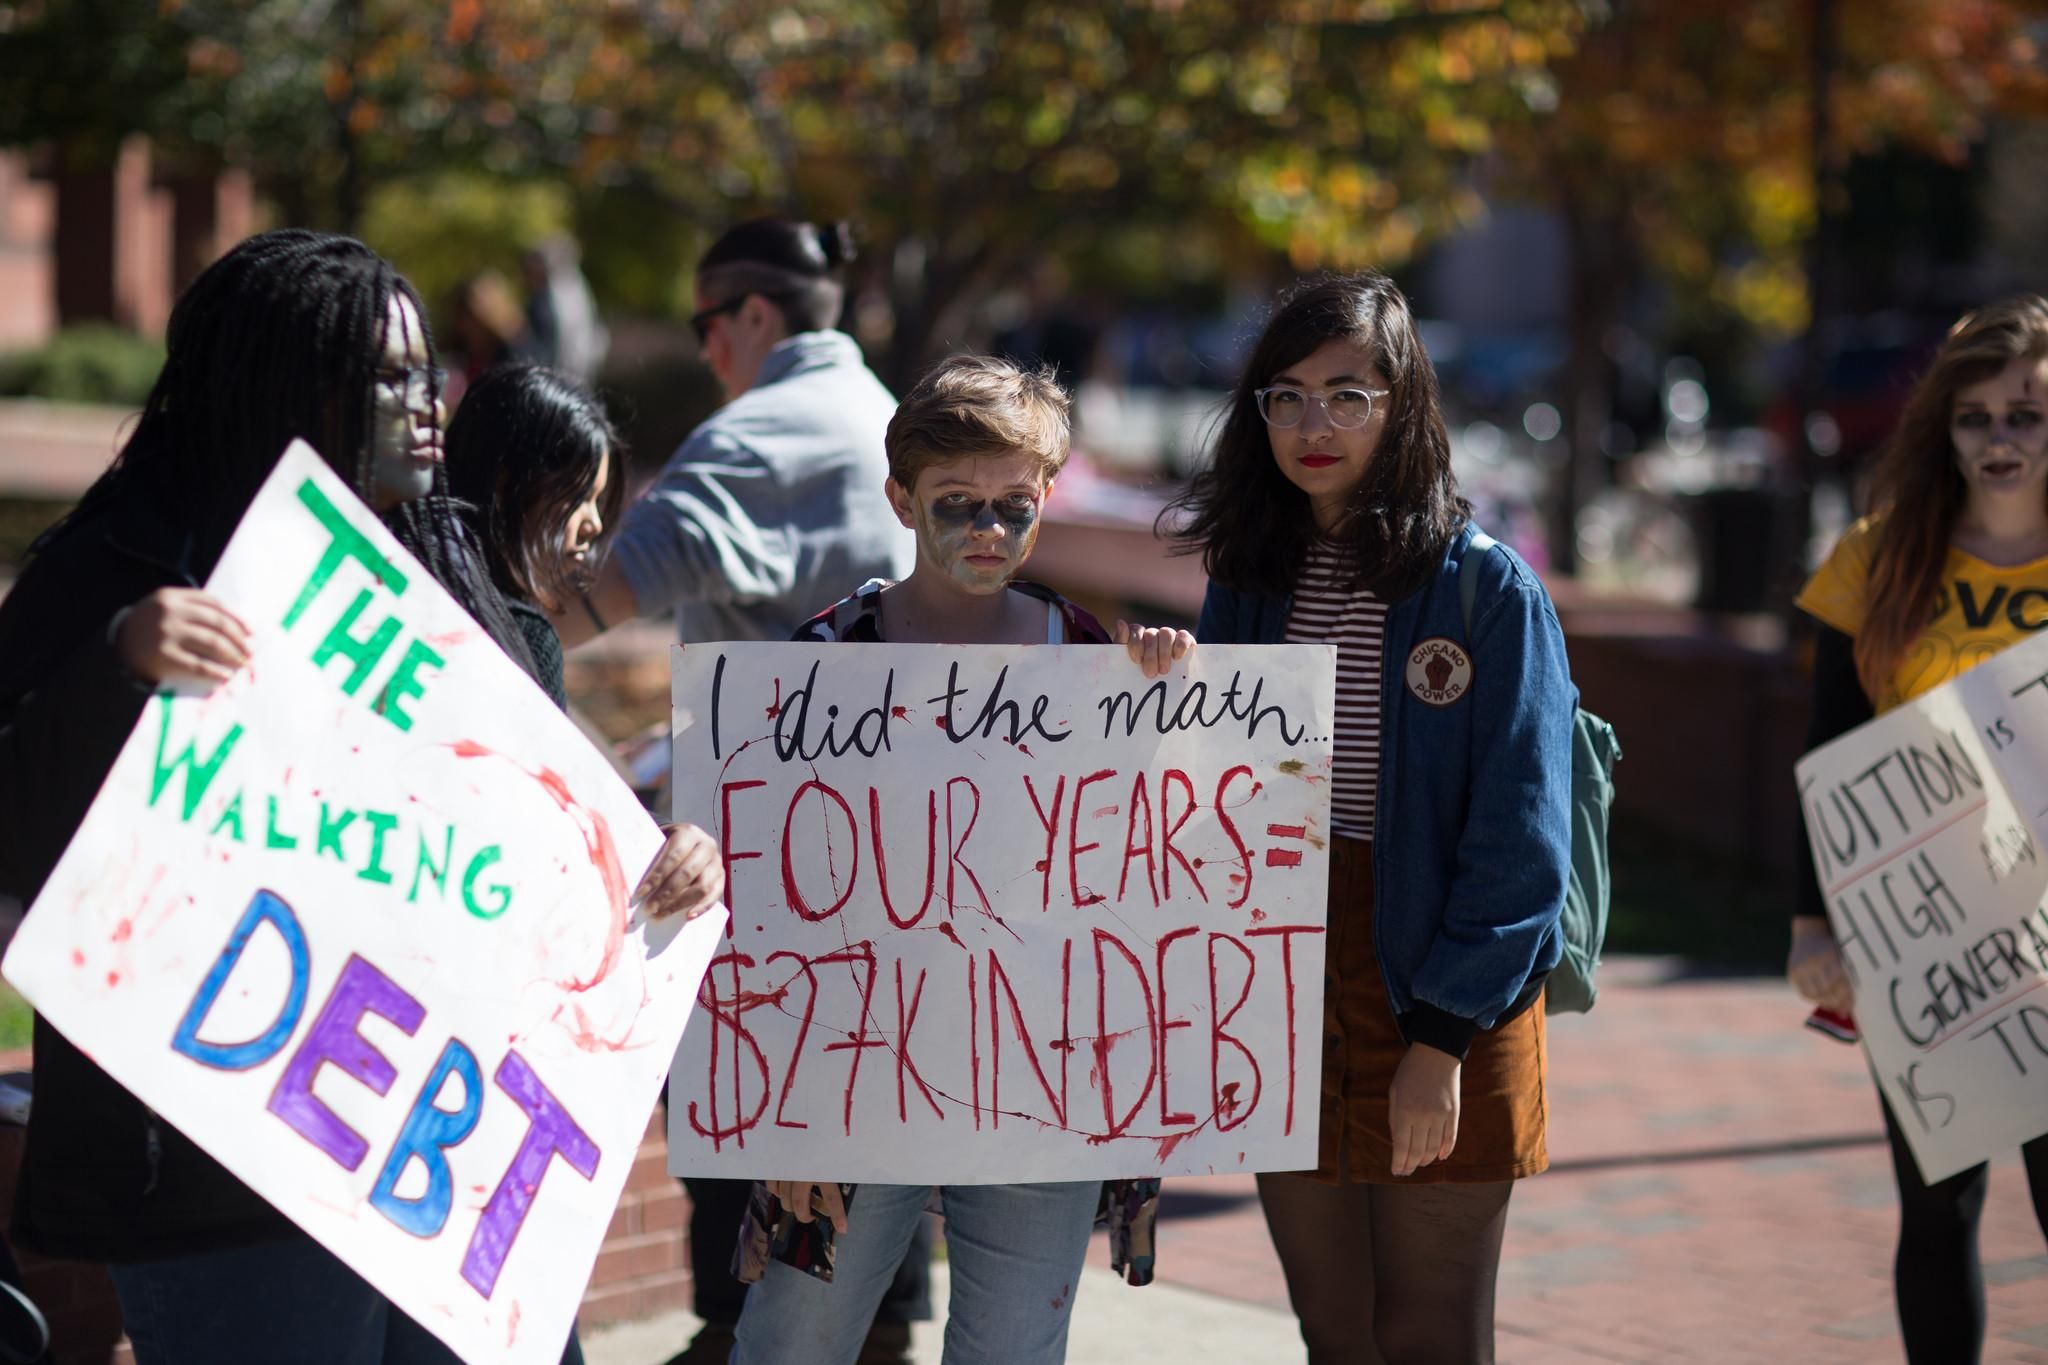 Student debt in the U.S. has reached more than $1.3 trillion. The Department of Education recently announced it would not work with the CFPB to hel students with complaints about their student loan servicers. 